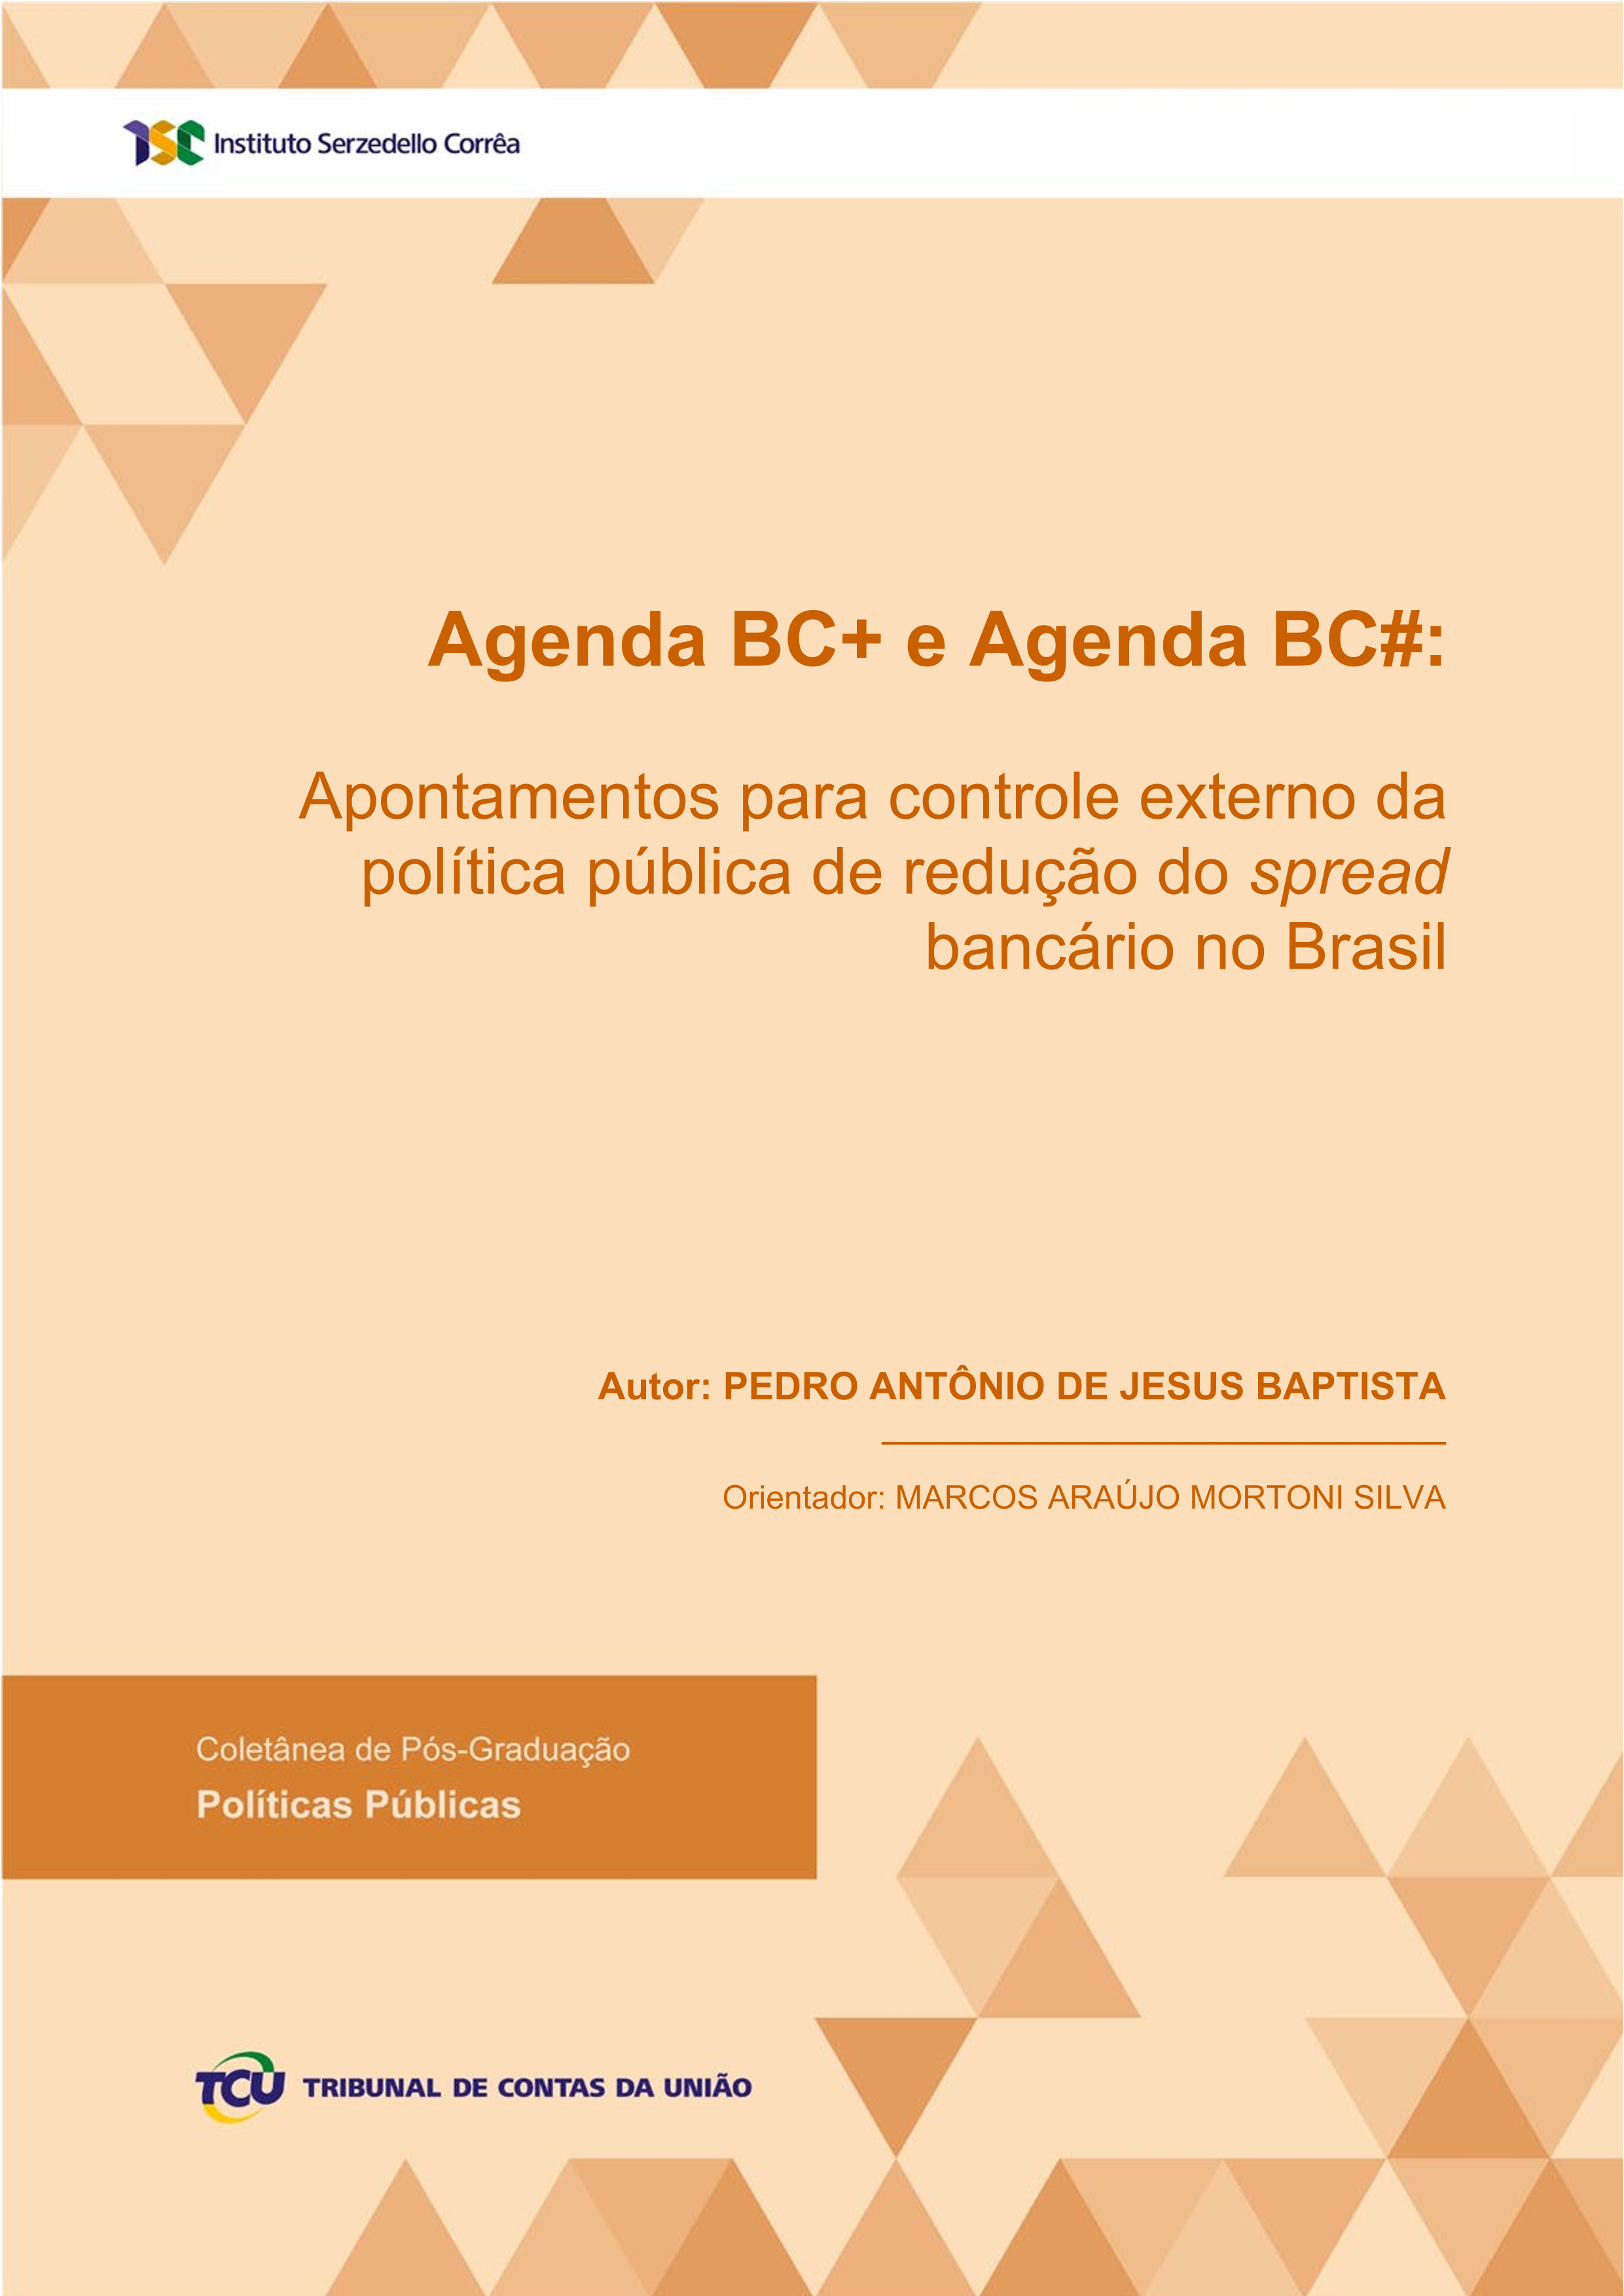 pedro tcc isc 2022 05 27 completo.png